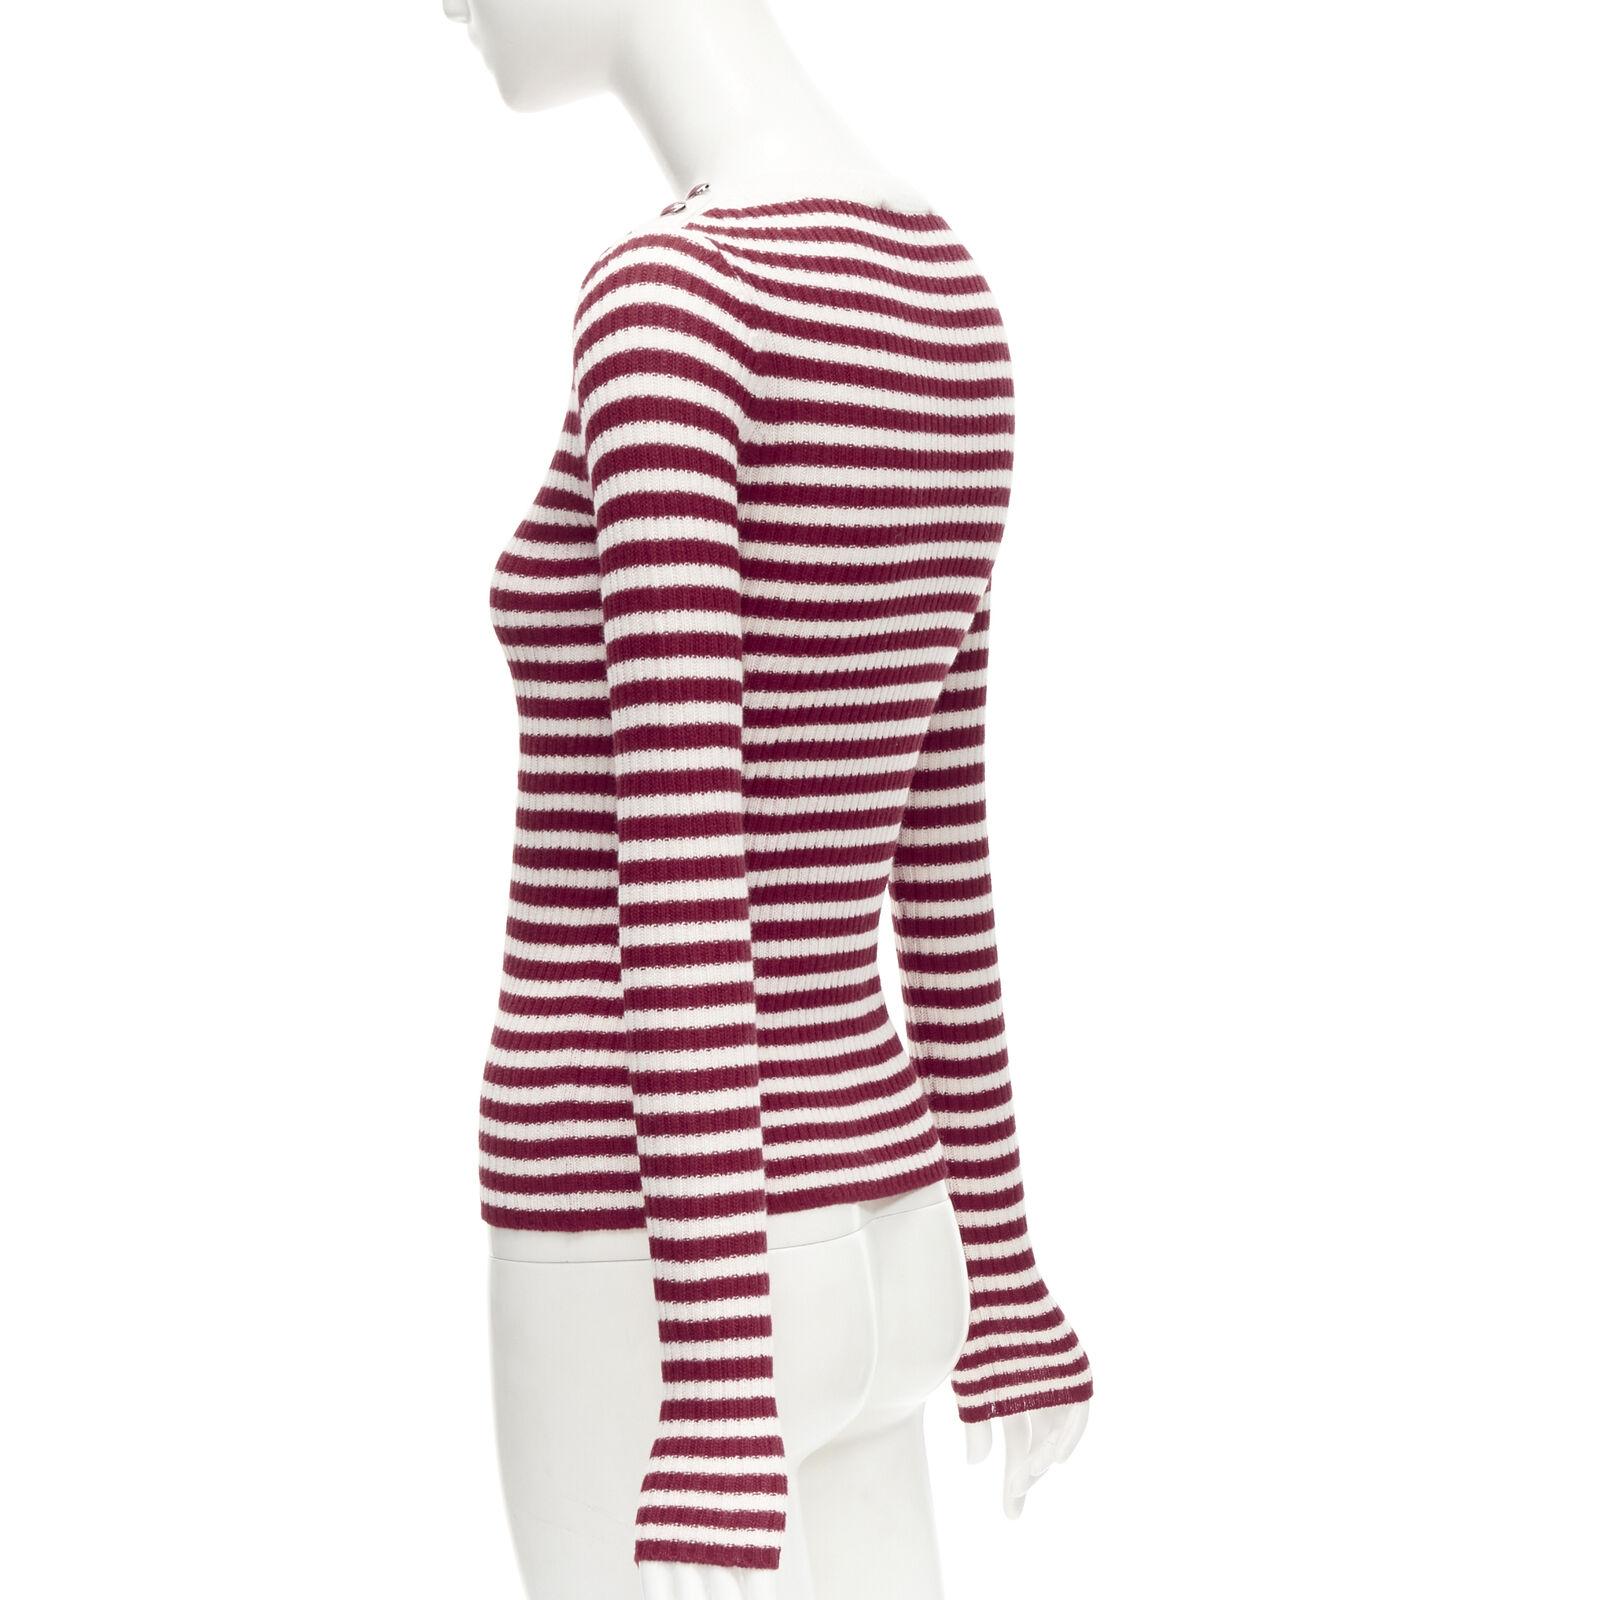 CHRISTIAN DIOR 100% cashmere white red striped boat neck CD button top FR34 XS 1